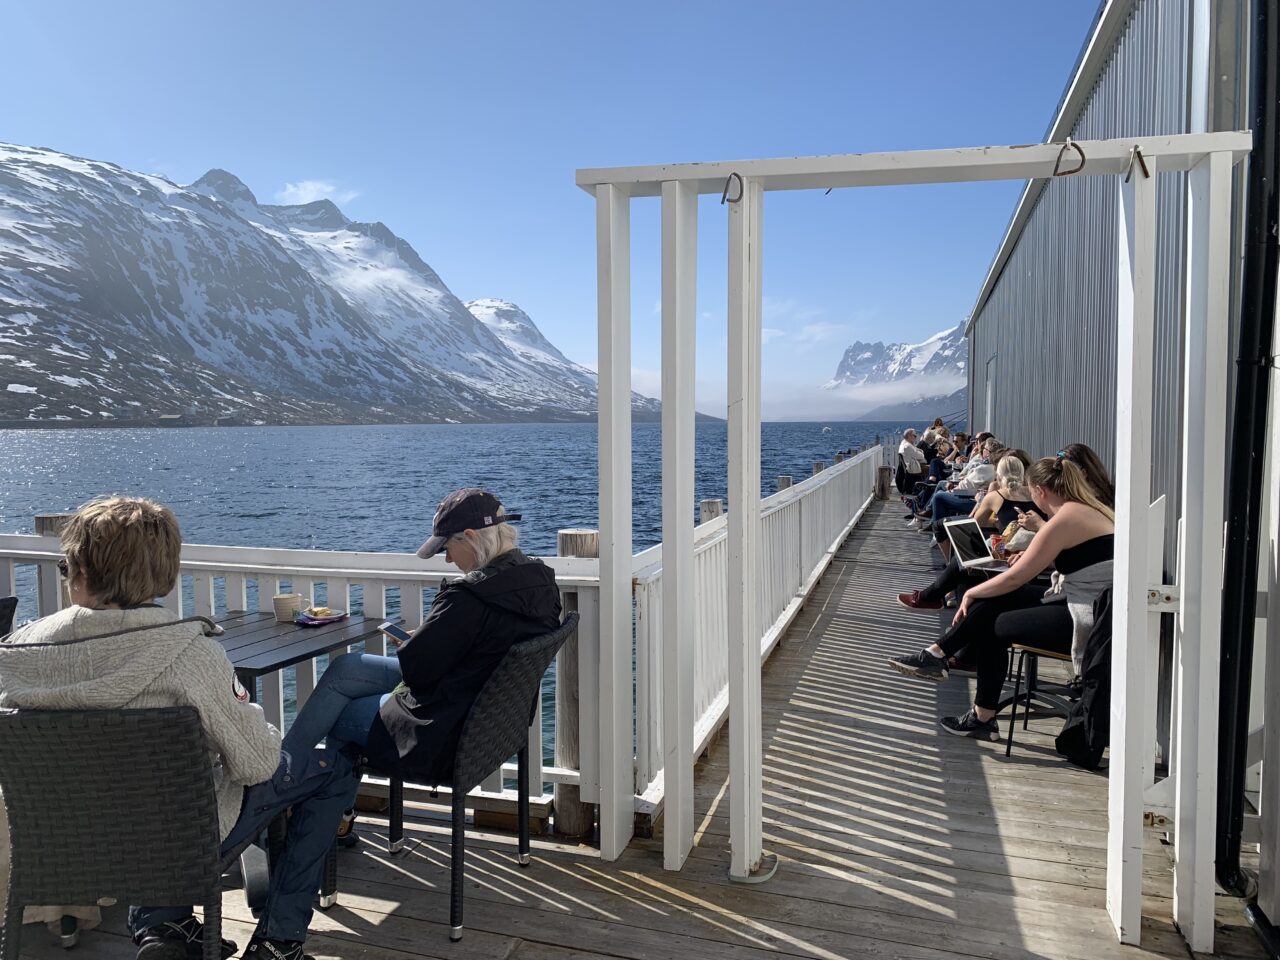 Bryggejentene in Ersfjord: A Cozy Cafe, with a Whale View…?